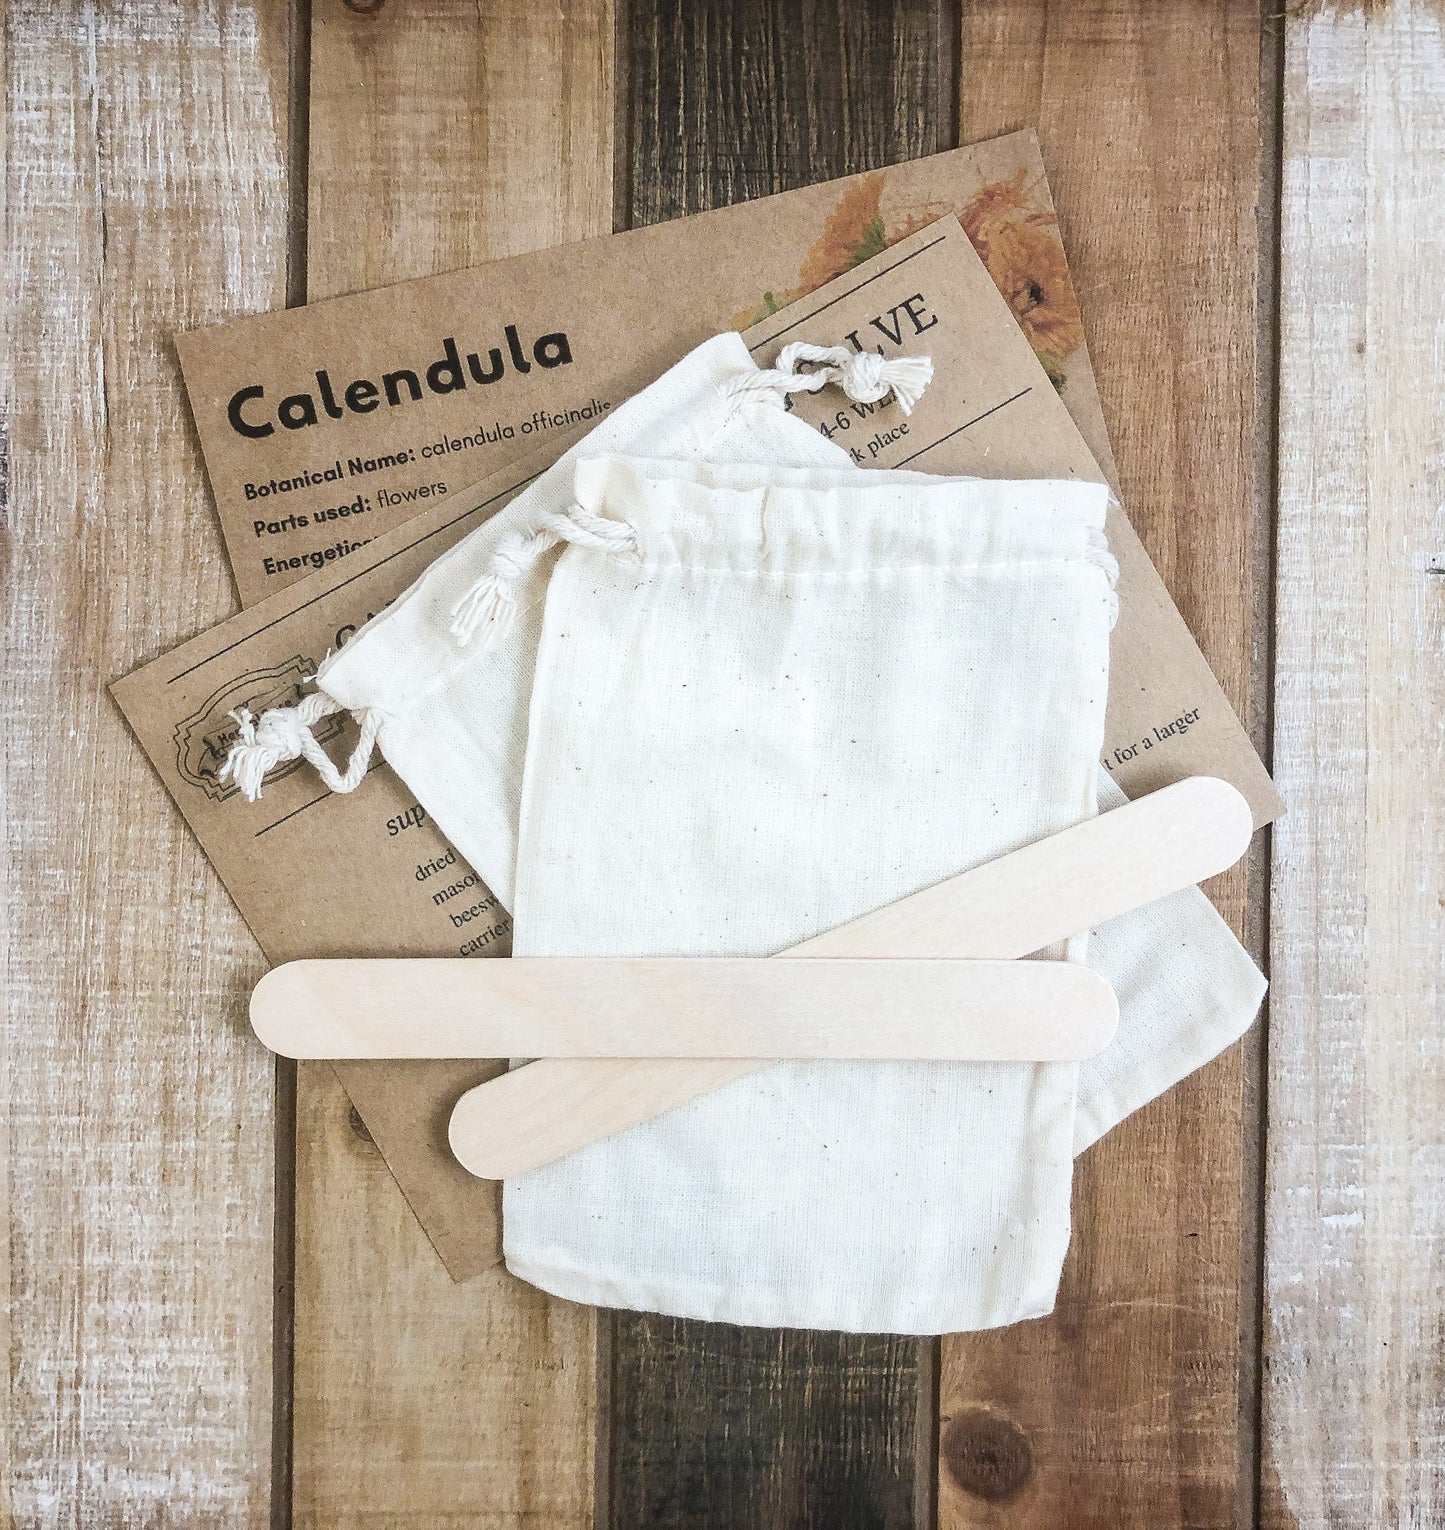 monograph card, instructions card laying on a wooden table covered partly with 2 muslin bags and 2 tongue depressors